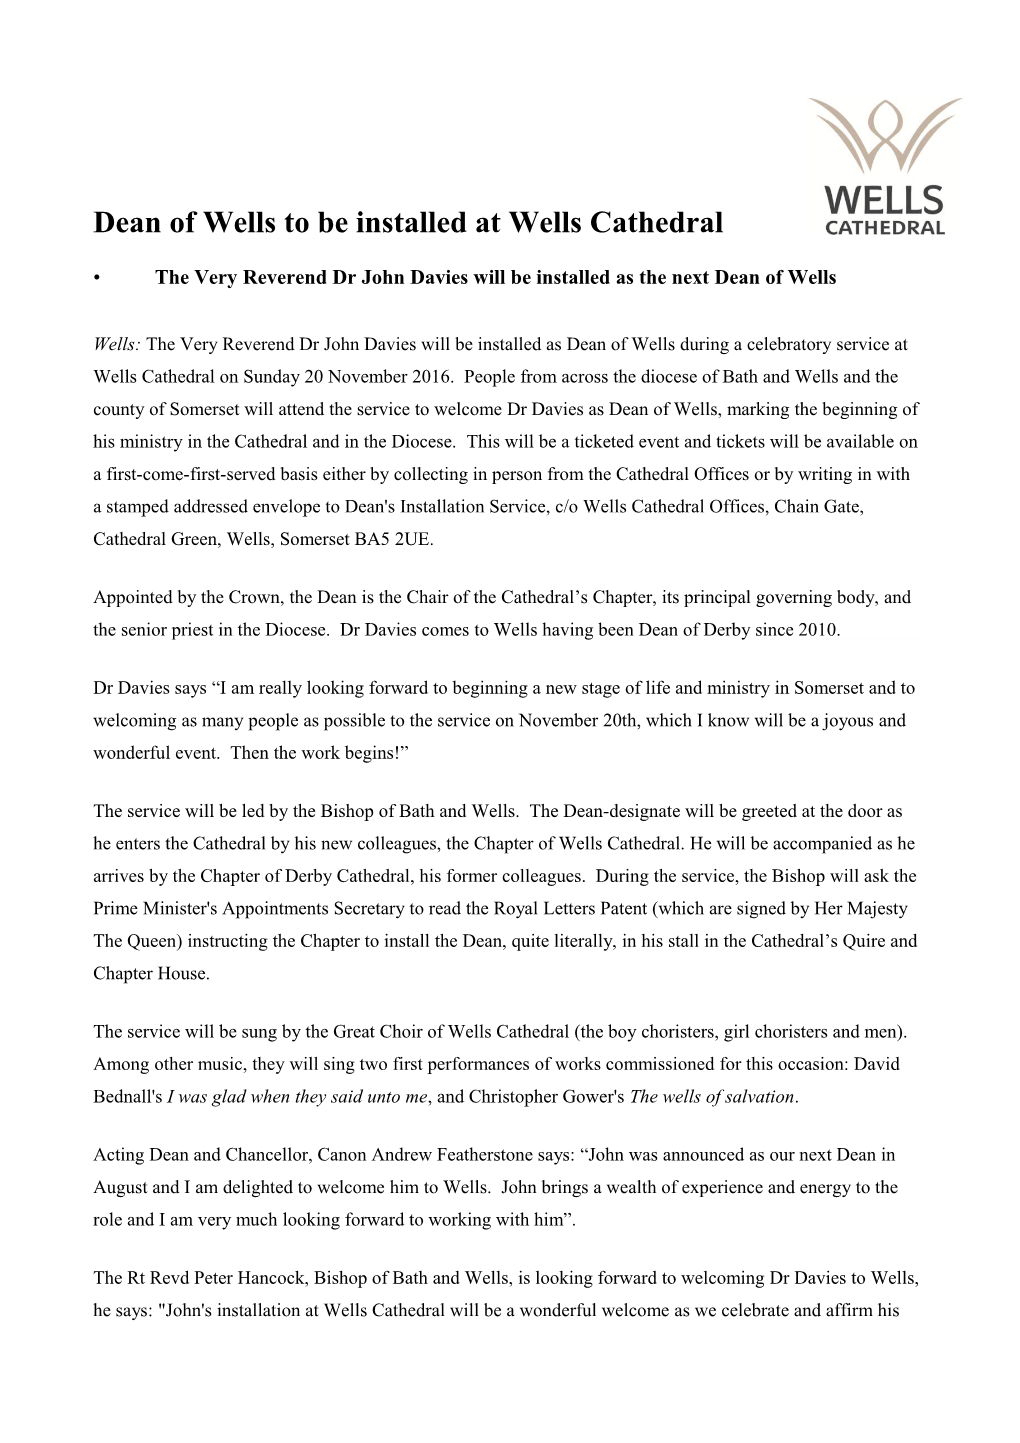 Dean of Wells to Be Installed at Wells Cathedral